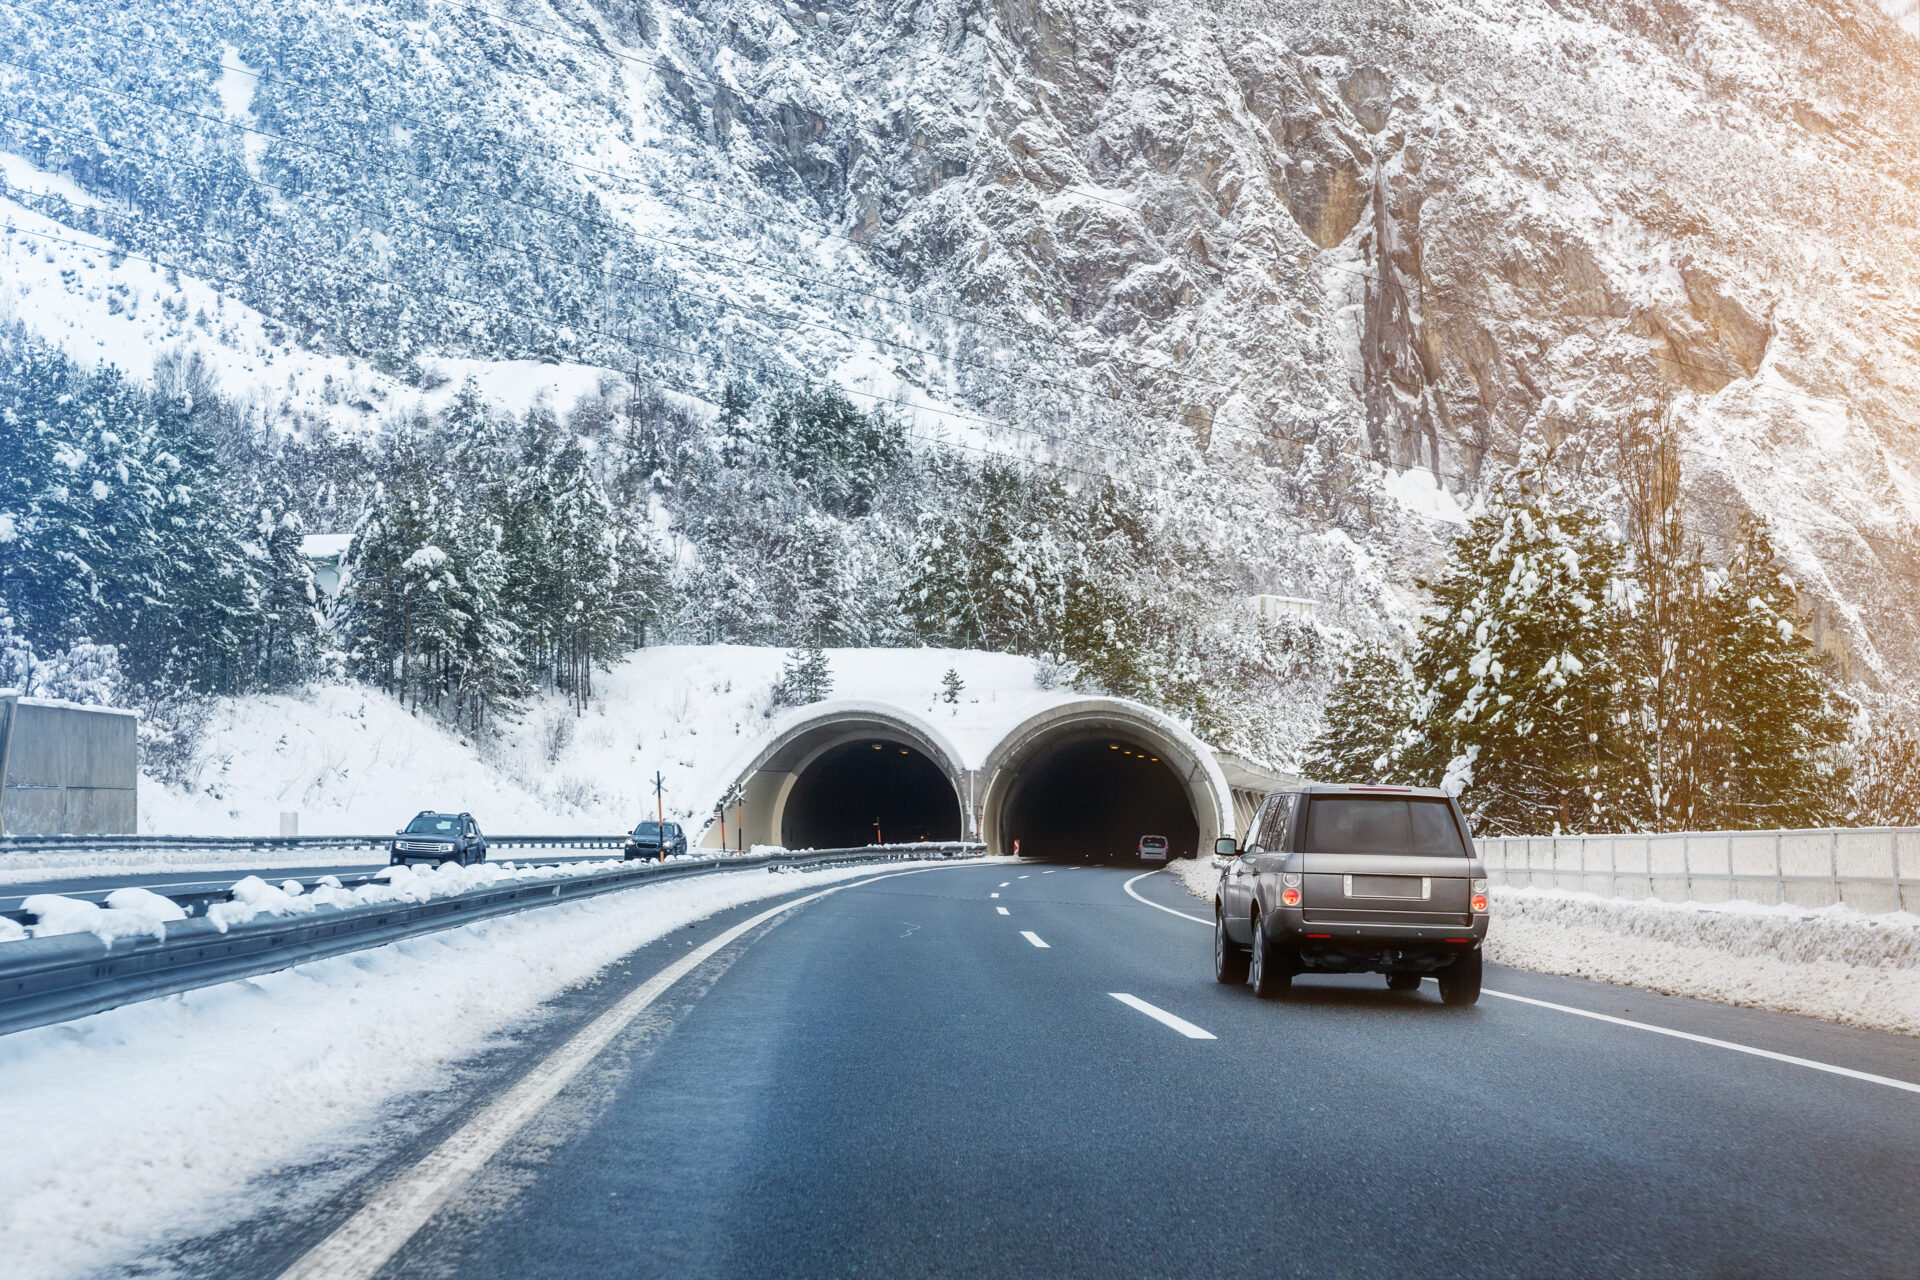 Winter alpine road landscape with tunnel, forest, mountains and blue sky on background at bright cold sunny day. Car trip family travel journey. Holiday skiing vacation. scenic austrian landscape